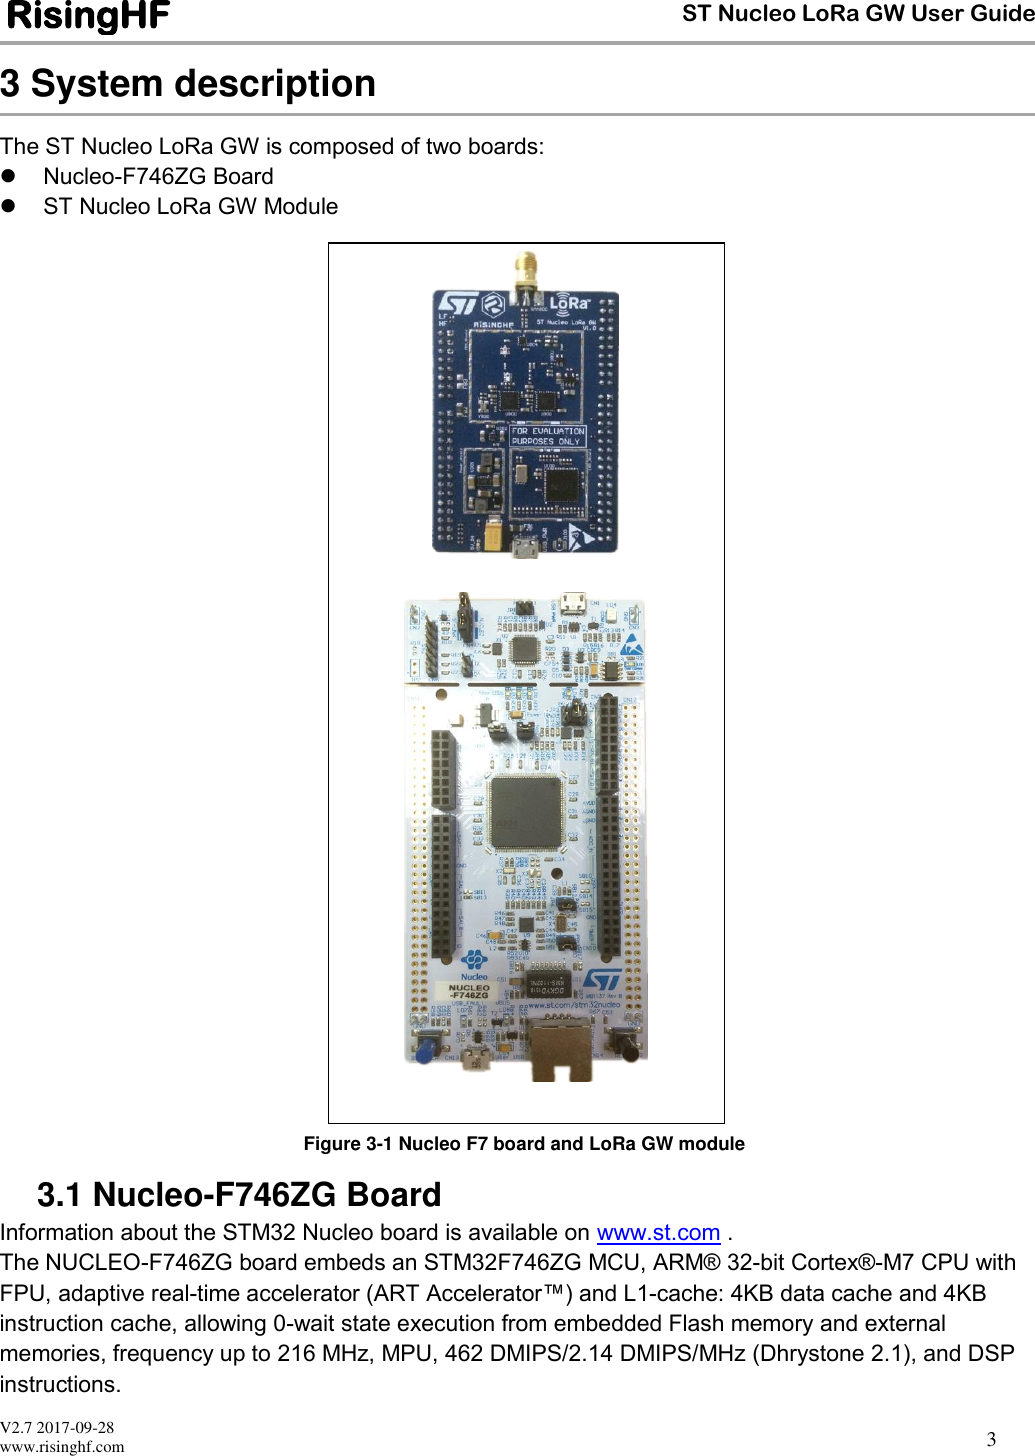  V2.7 2017-09-28 www.risinghf.com ST Nucleo LoRa GW User Guide RisingHF  3 3 System description The ST Nucleo LoRa GW is composed of two boards: ⚫  Nucleo-F746ZG Board ⚫  ST Nucleo LoRa GW Module                               Figure 3-1 Nucleo F7 board and LoRa GW module 3.1 Nucleo-F746ZG Board Information about the STM32 Nucleo board is available on www.st.com . The NUCLEO-F746ZG board embeds an STM32F746ZG MCU, ARM® 32-bit Cortex®-M7 CPU with FPU, adaptive real-time accelerator (ART Accelerator™) and L1-cache: 4KB data cache and 4KB instruction cache, allowing 0-wait state execution from embedded Flash memory and external memories, frequency up to 216 MHz, MPU, 462 DMIPS/2.14 DMIPS/MHz (Dhrystone 2.1), and DSP instructions.    